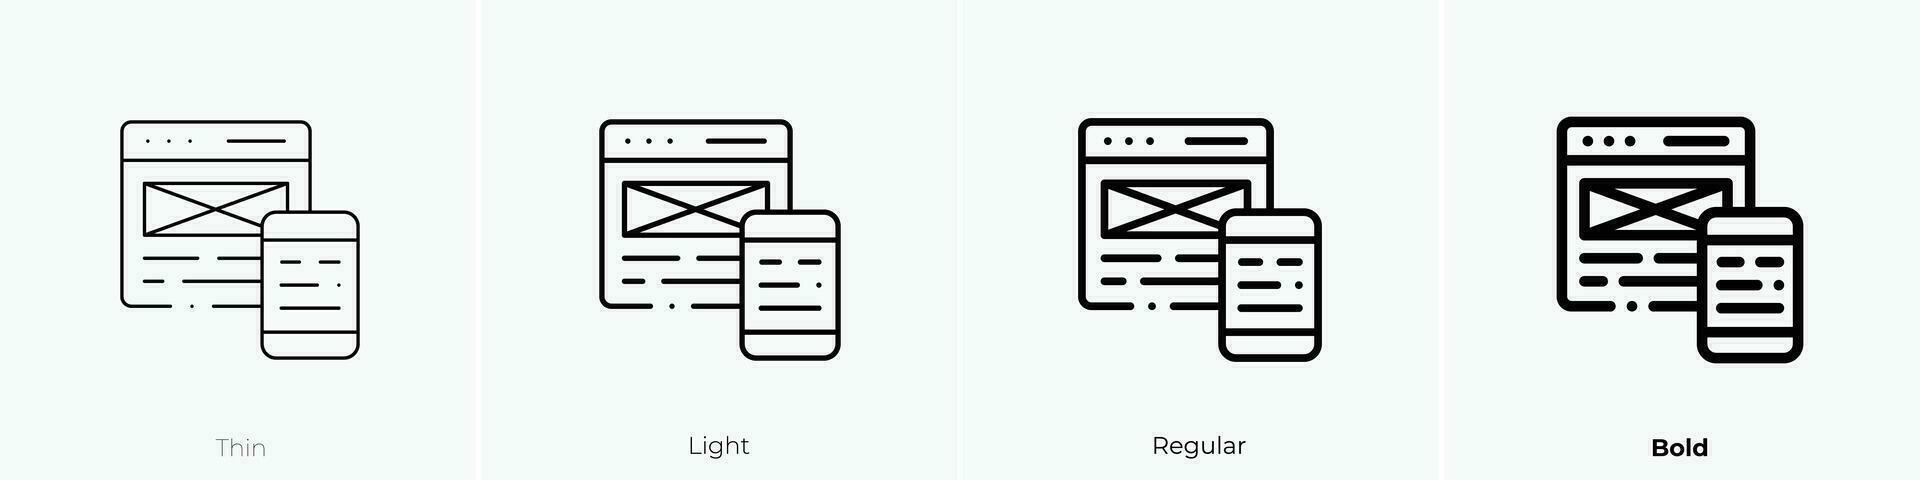 responsive design icon. Thin, Light, Regular And Bold style design isolated on white background vector